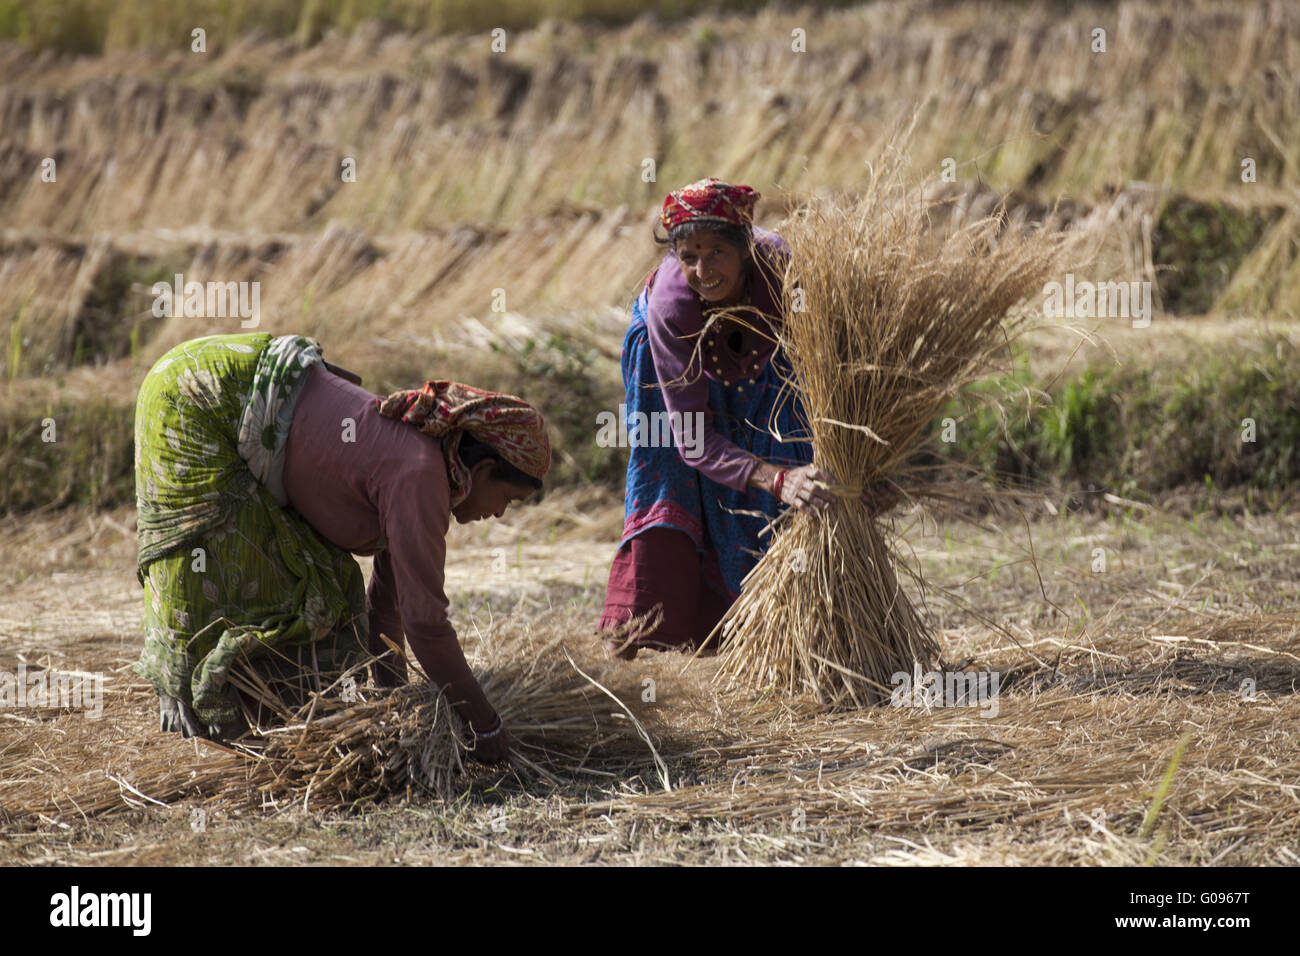 Indian woman harvest rice straw, North India Stock Photo